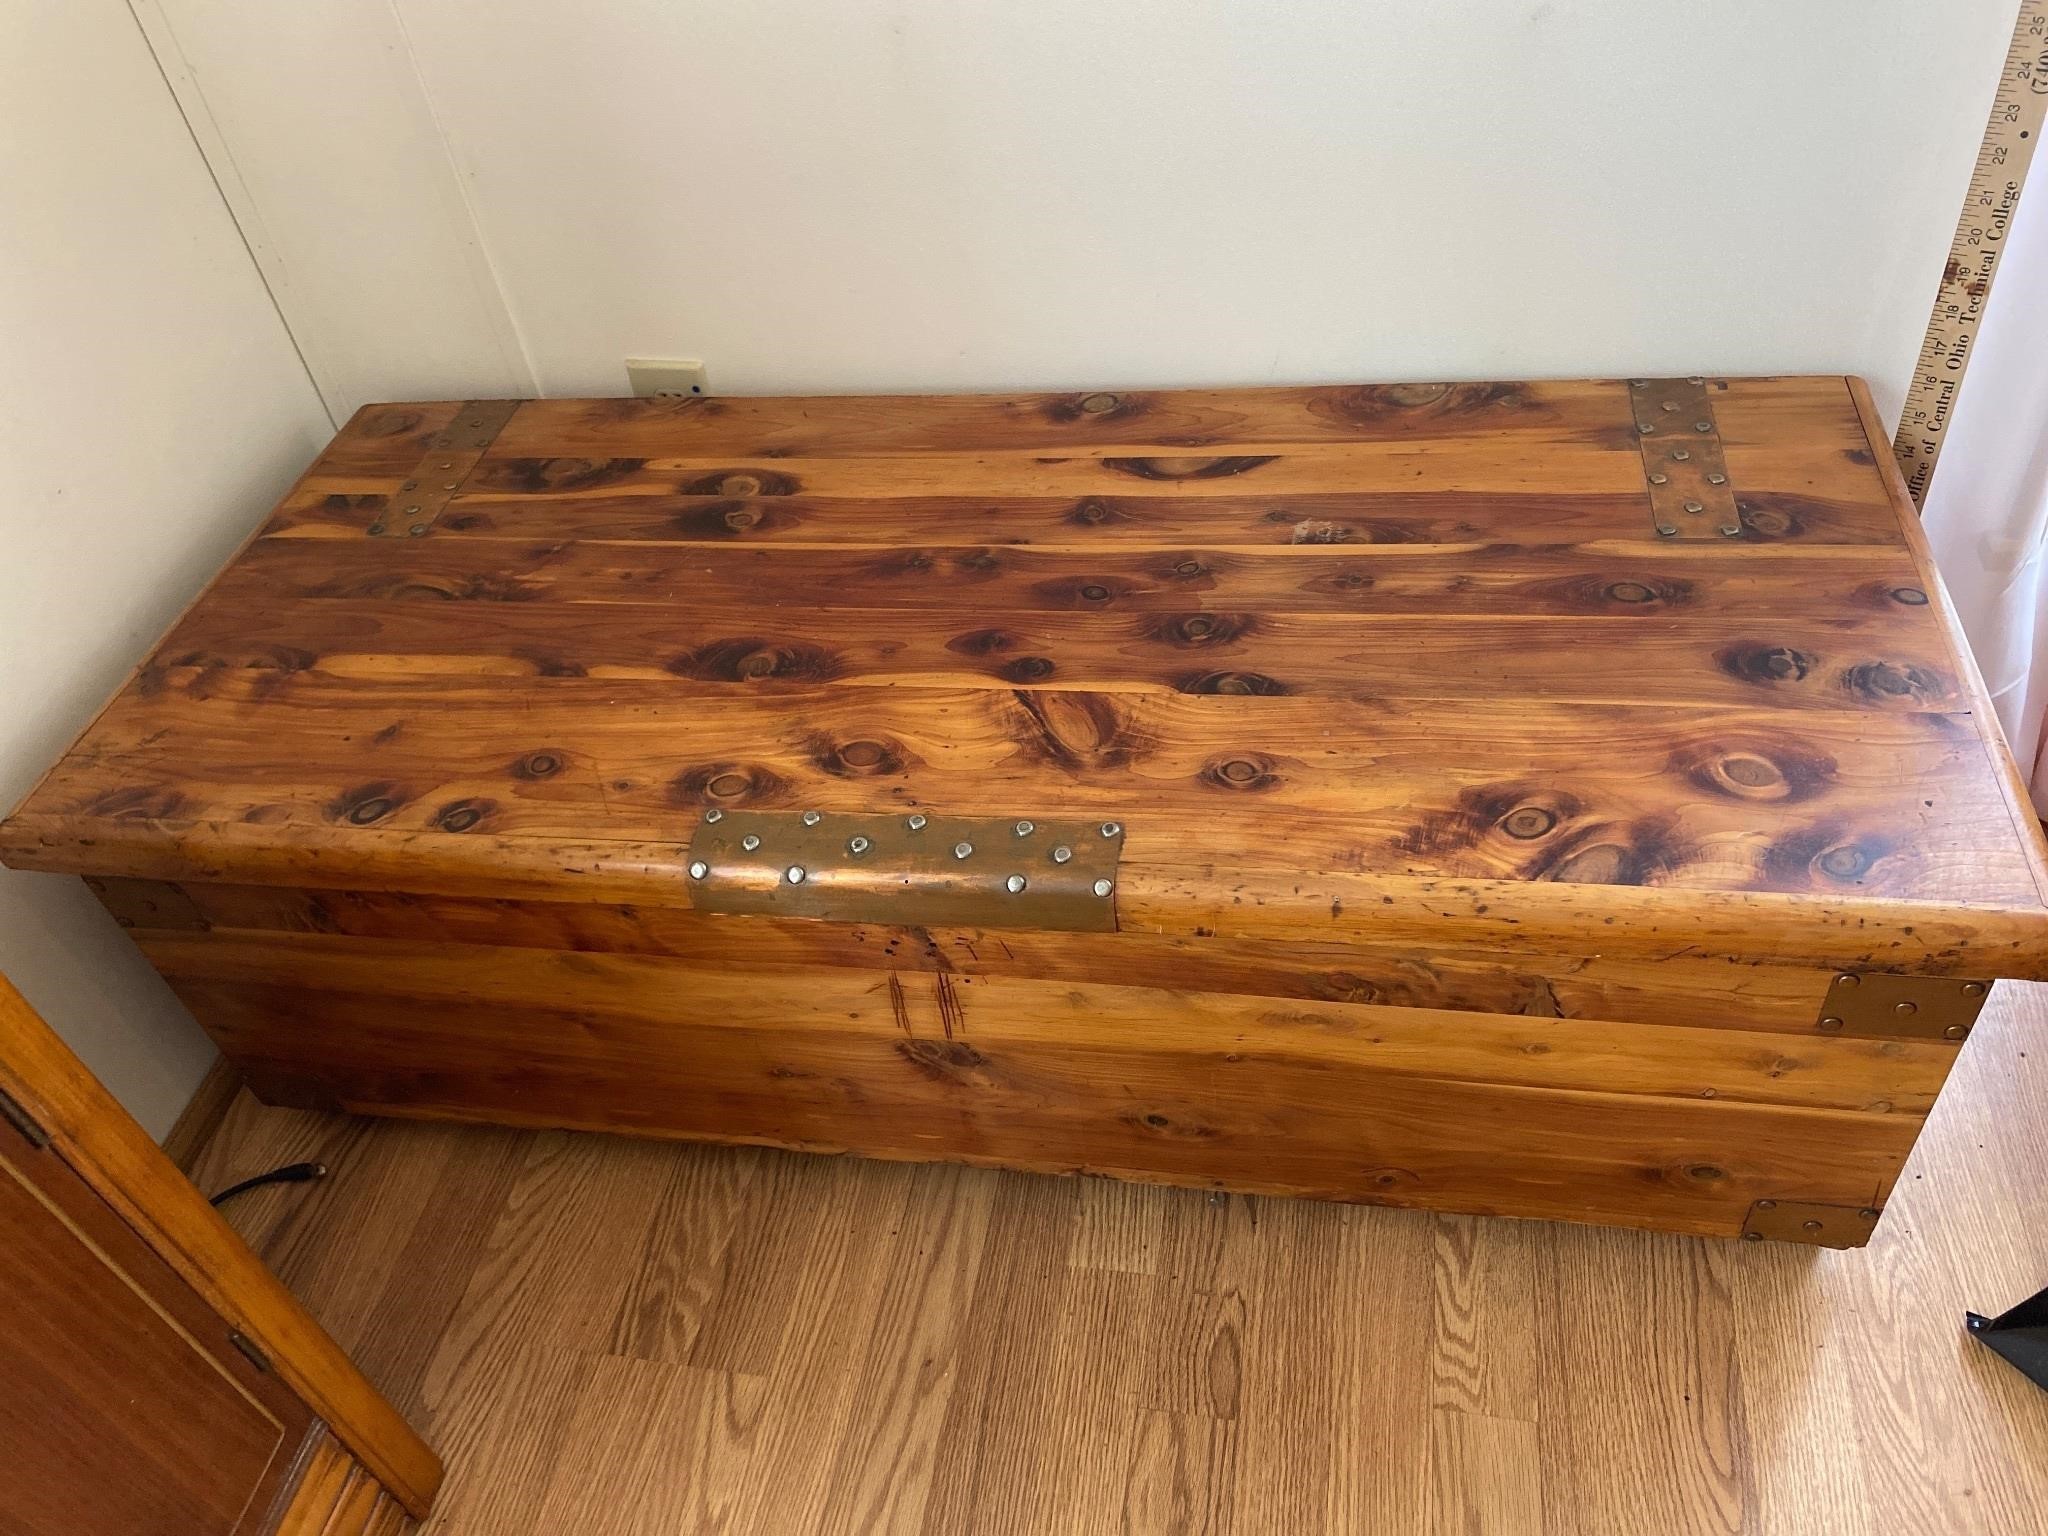 Cedar Chest and Contents